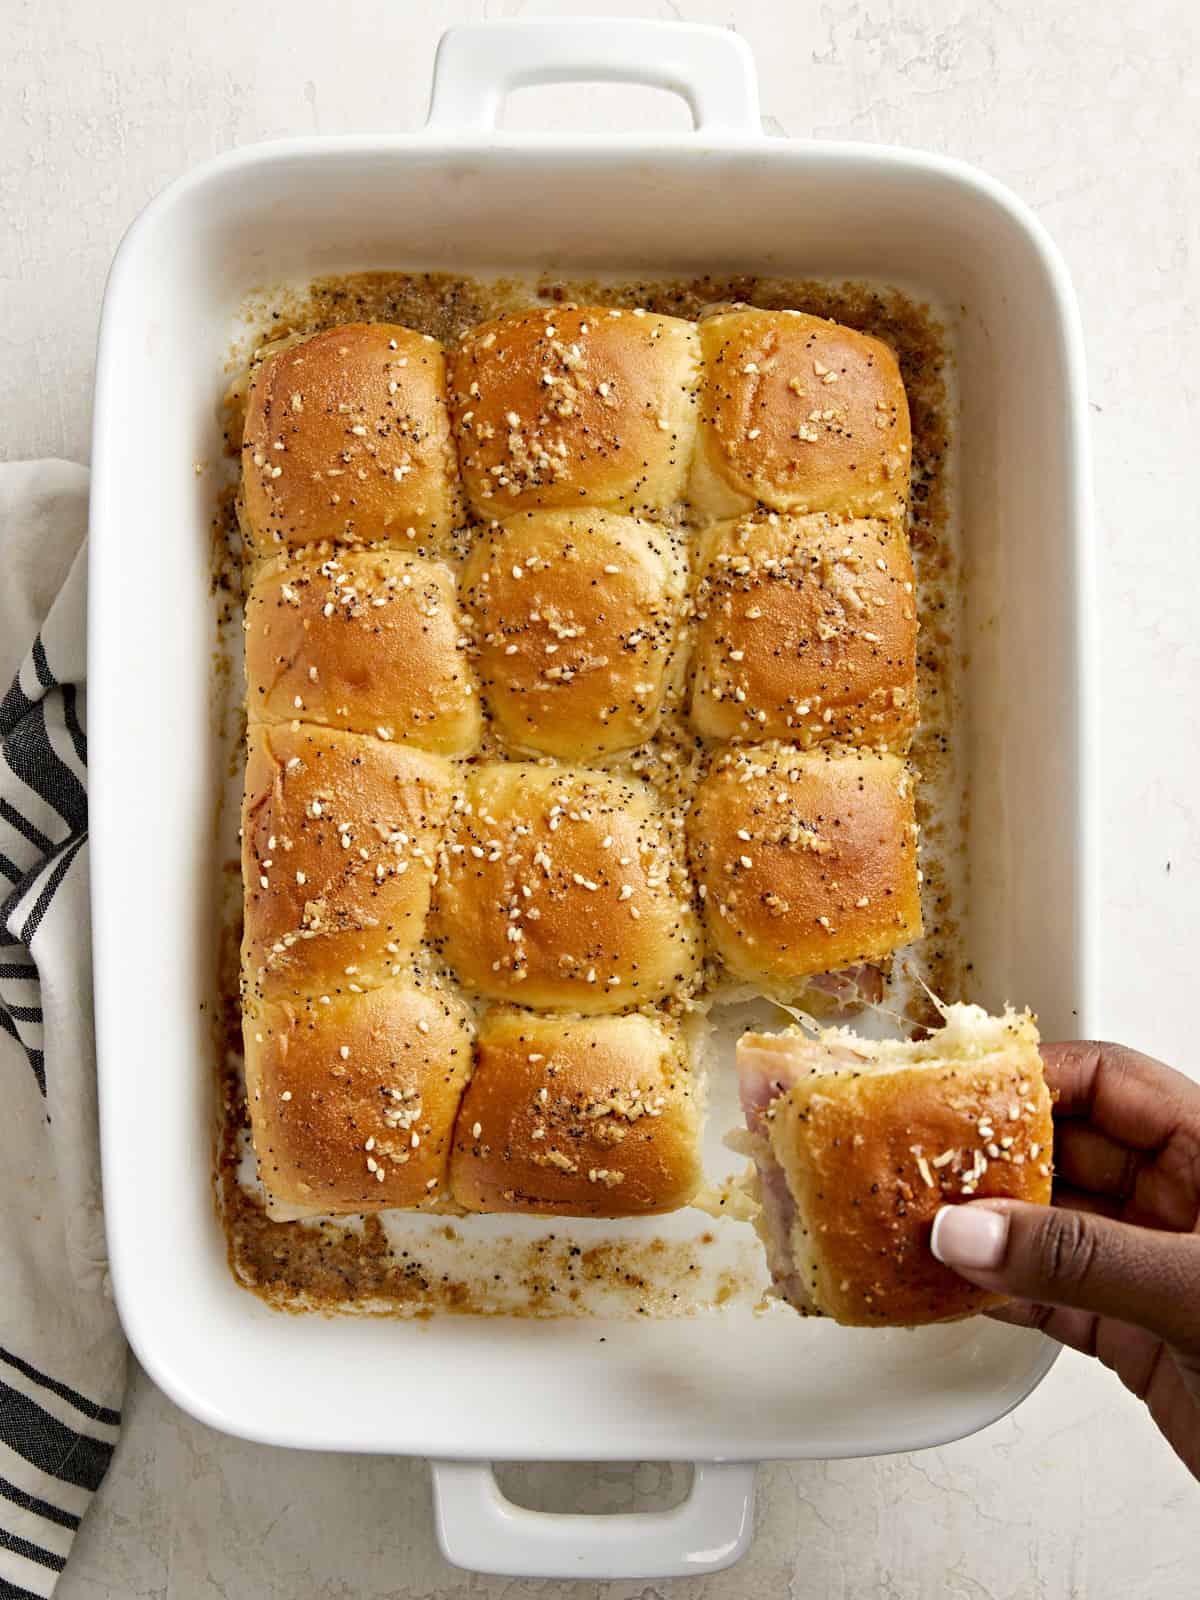 Overhead view of ham and cheese sliders in a baking dish with a hand pulling one slider out of the dish.